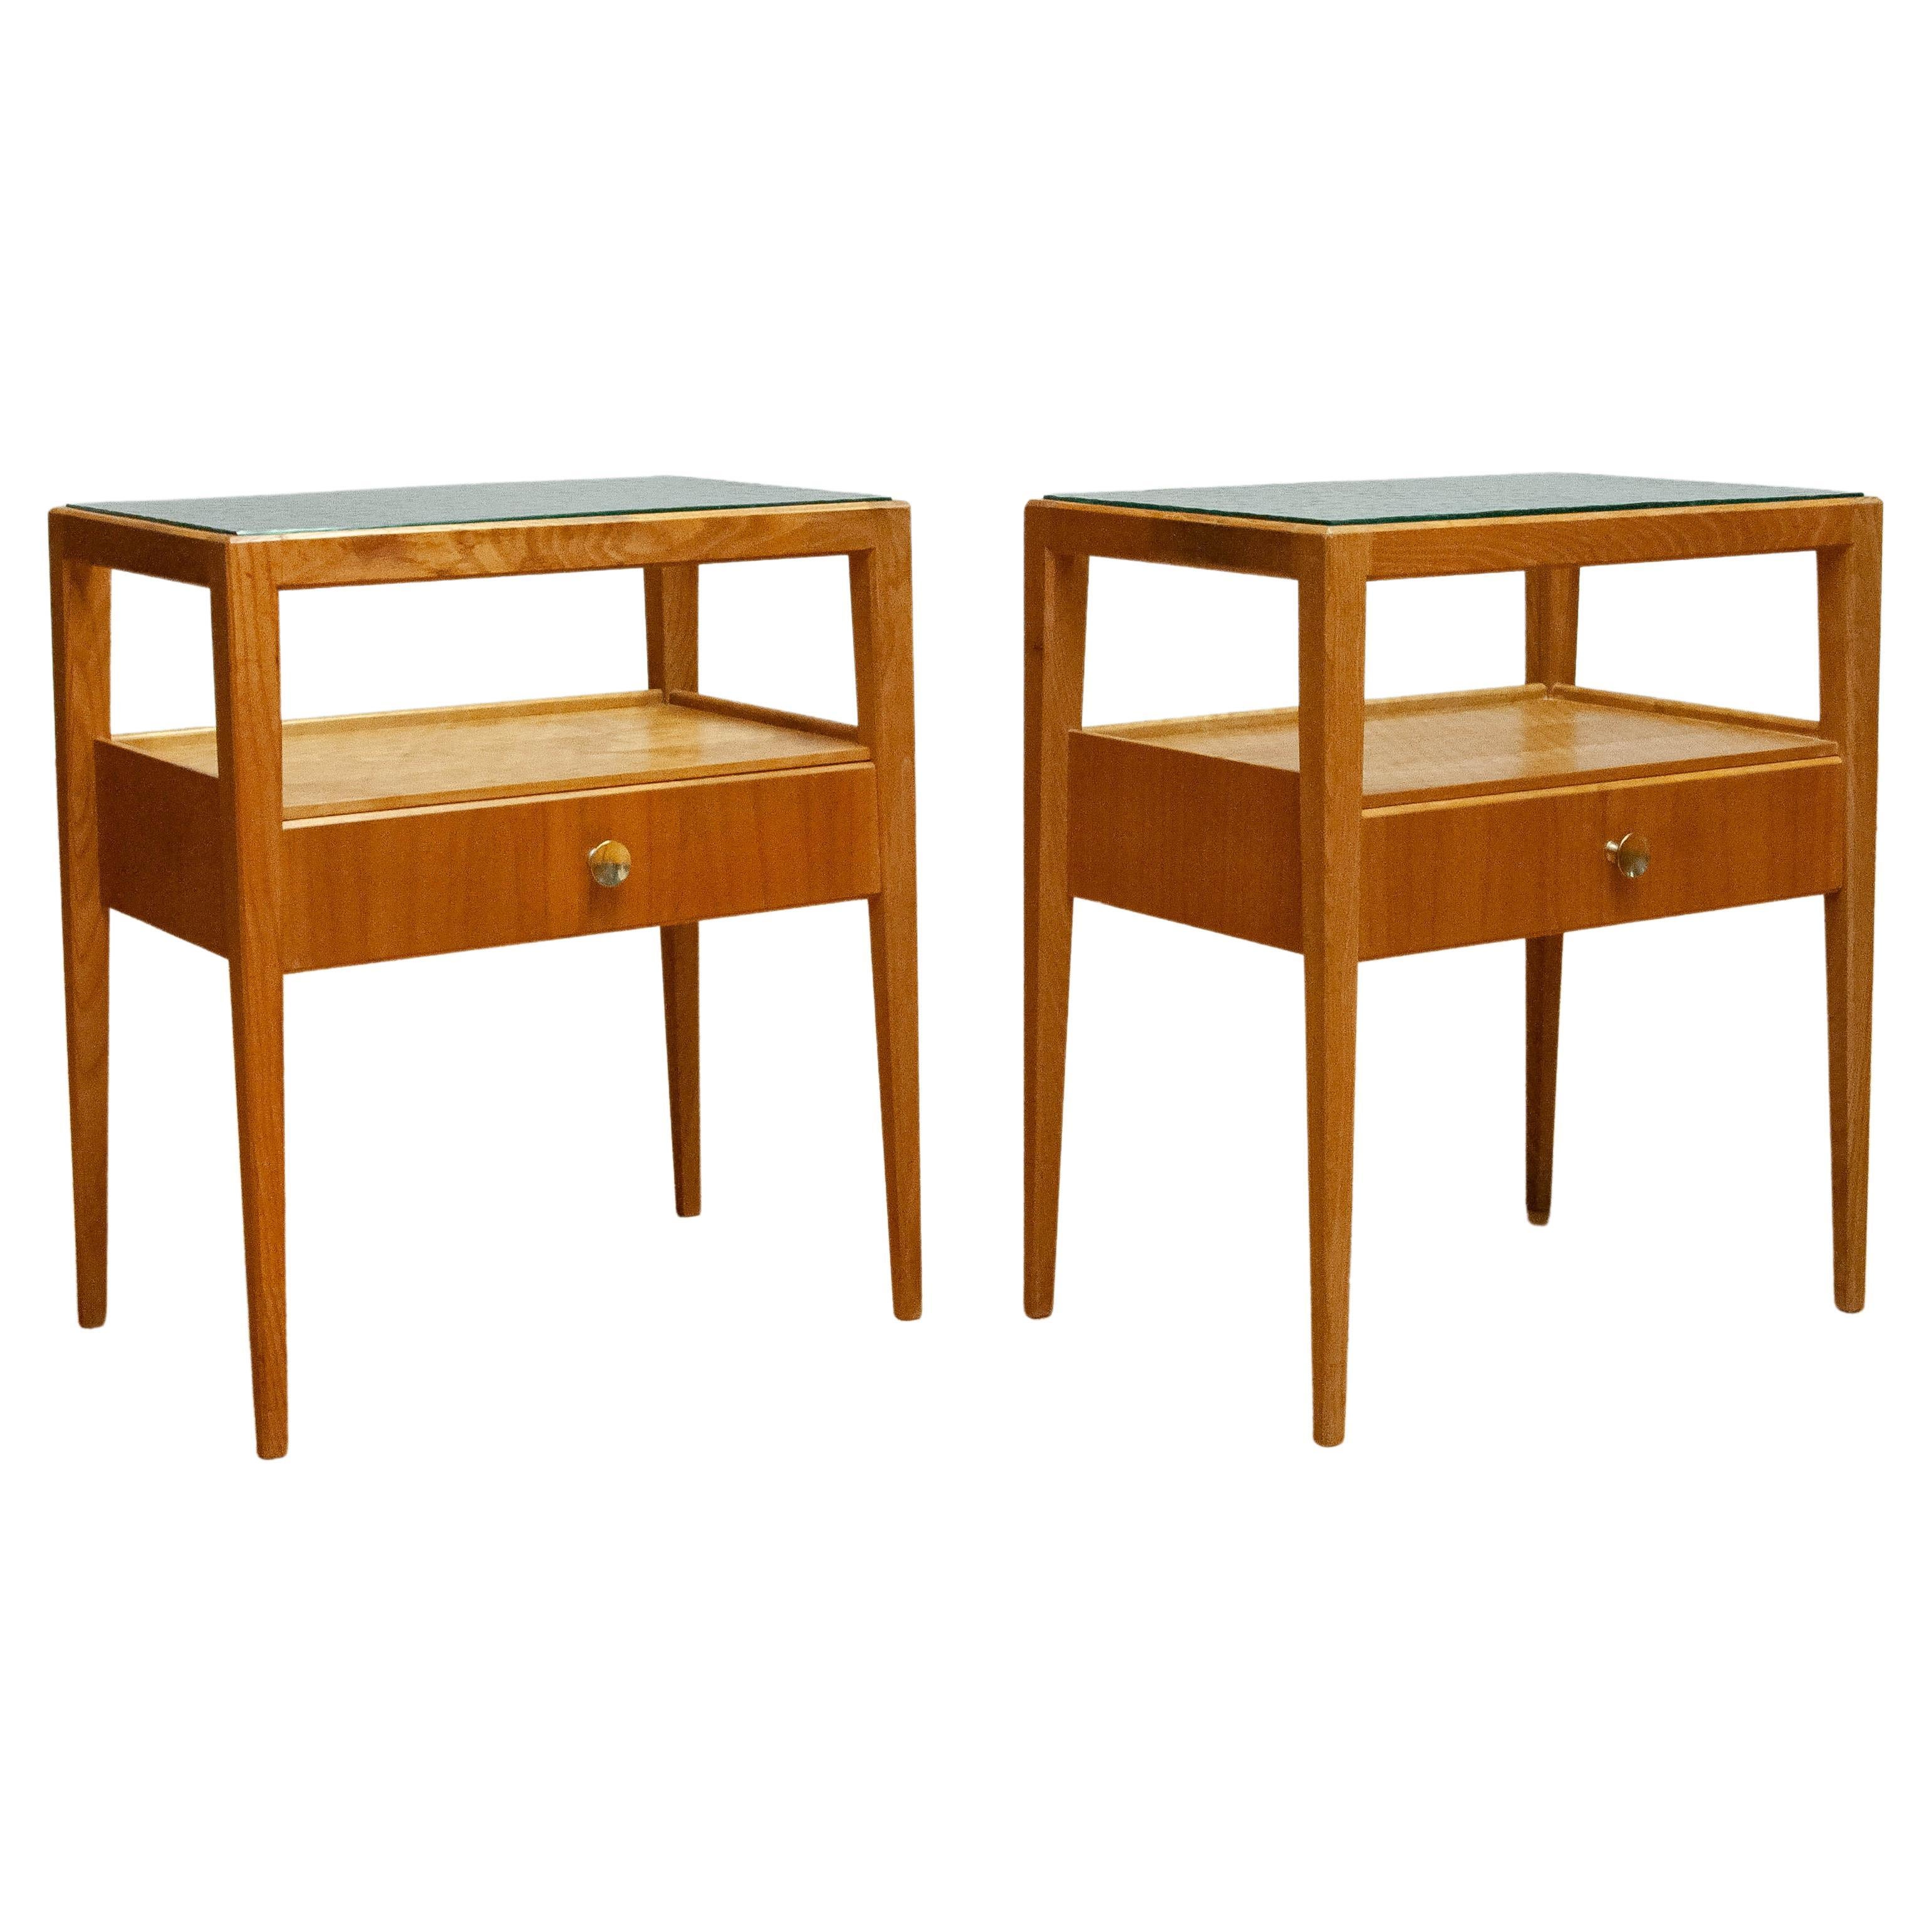 1950s Pair Bedside Tables In Elm With Glass Top By Carl-Axel Acking For Bodafors For Sale